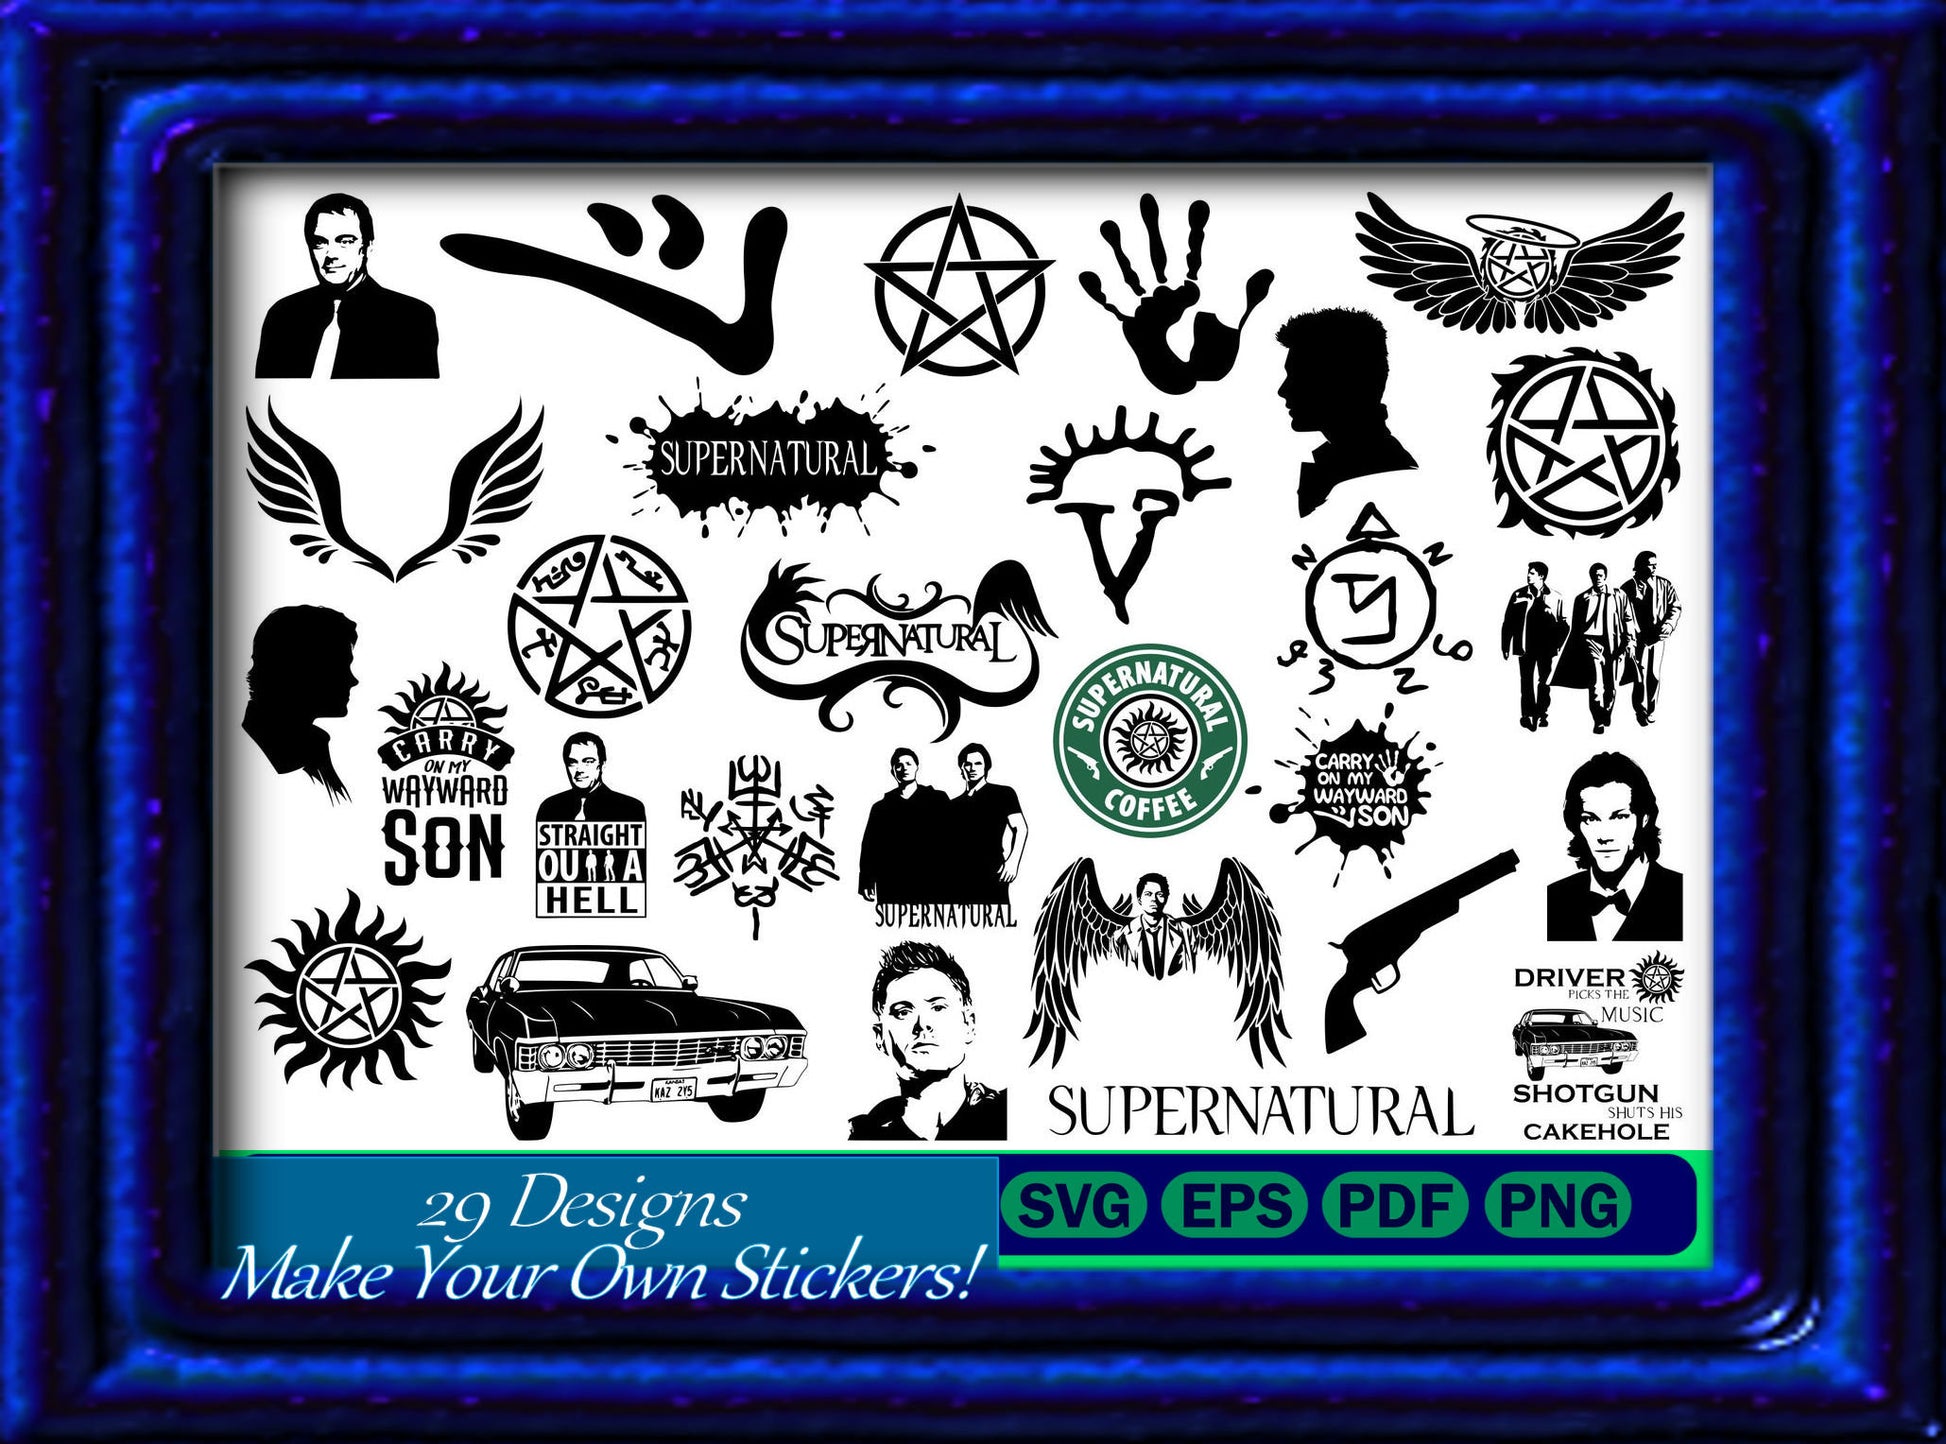 Supernatural TV Series Fan Images - Make Your Own Stickers by Download and Printing On Label Paper - Resizable PDF PNG